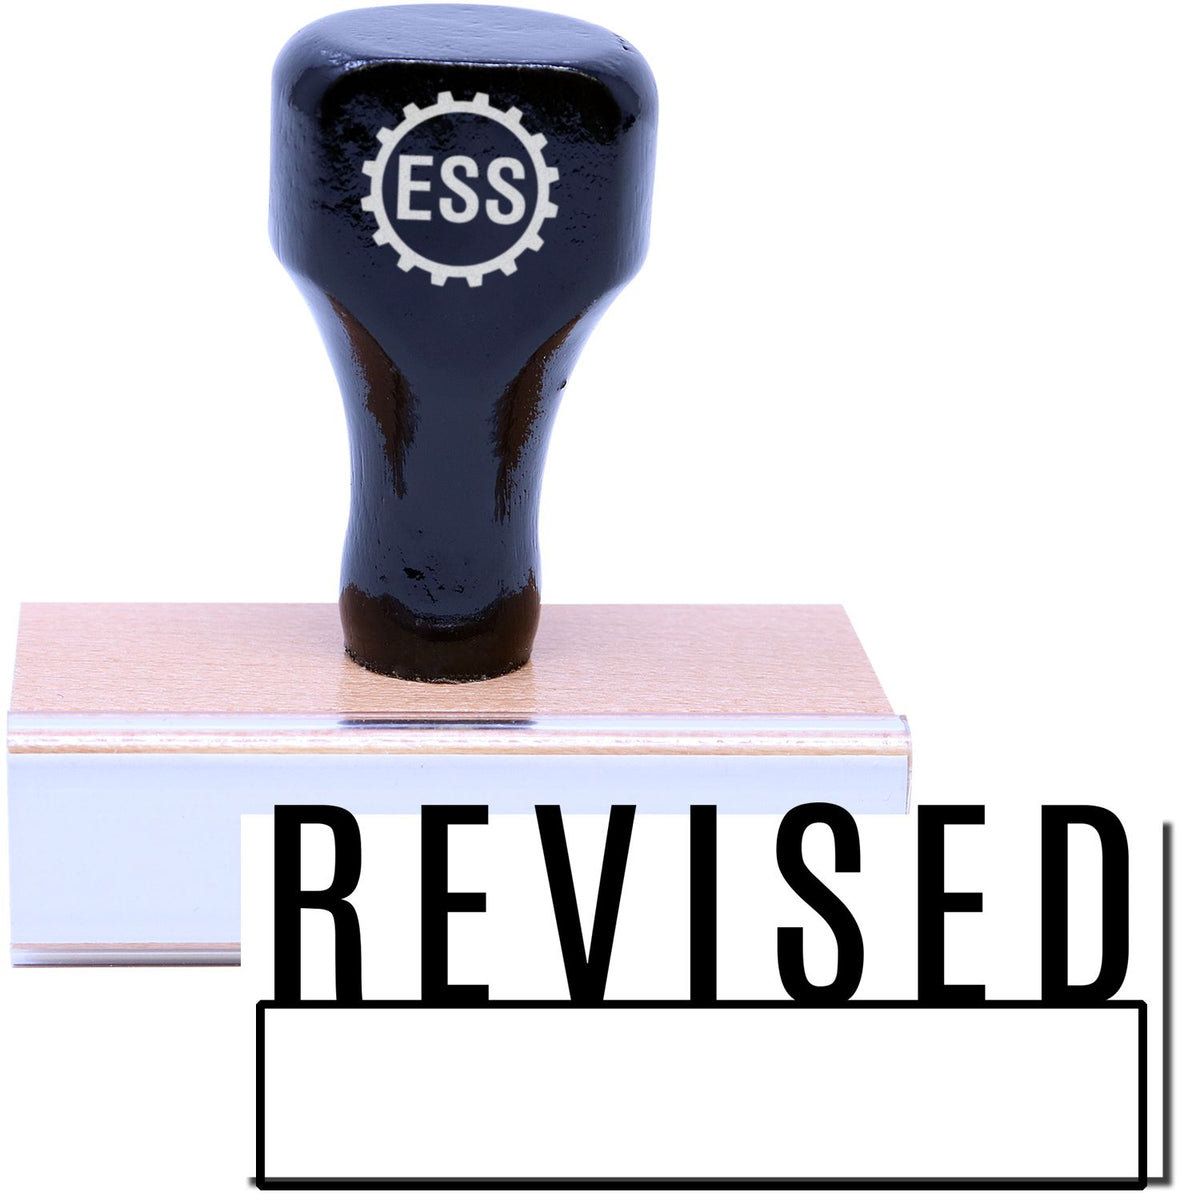 A stock office rubber stamp with a stamped image showing how the text &quot;REVISED&quot; in a large font with a box under the text is displayed after stamping.